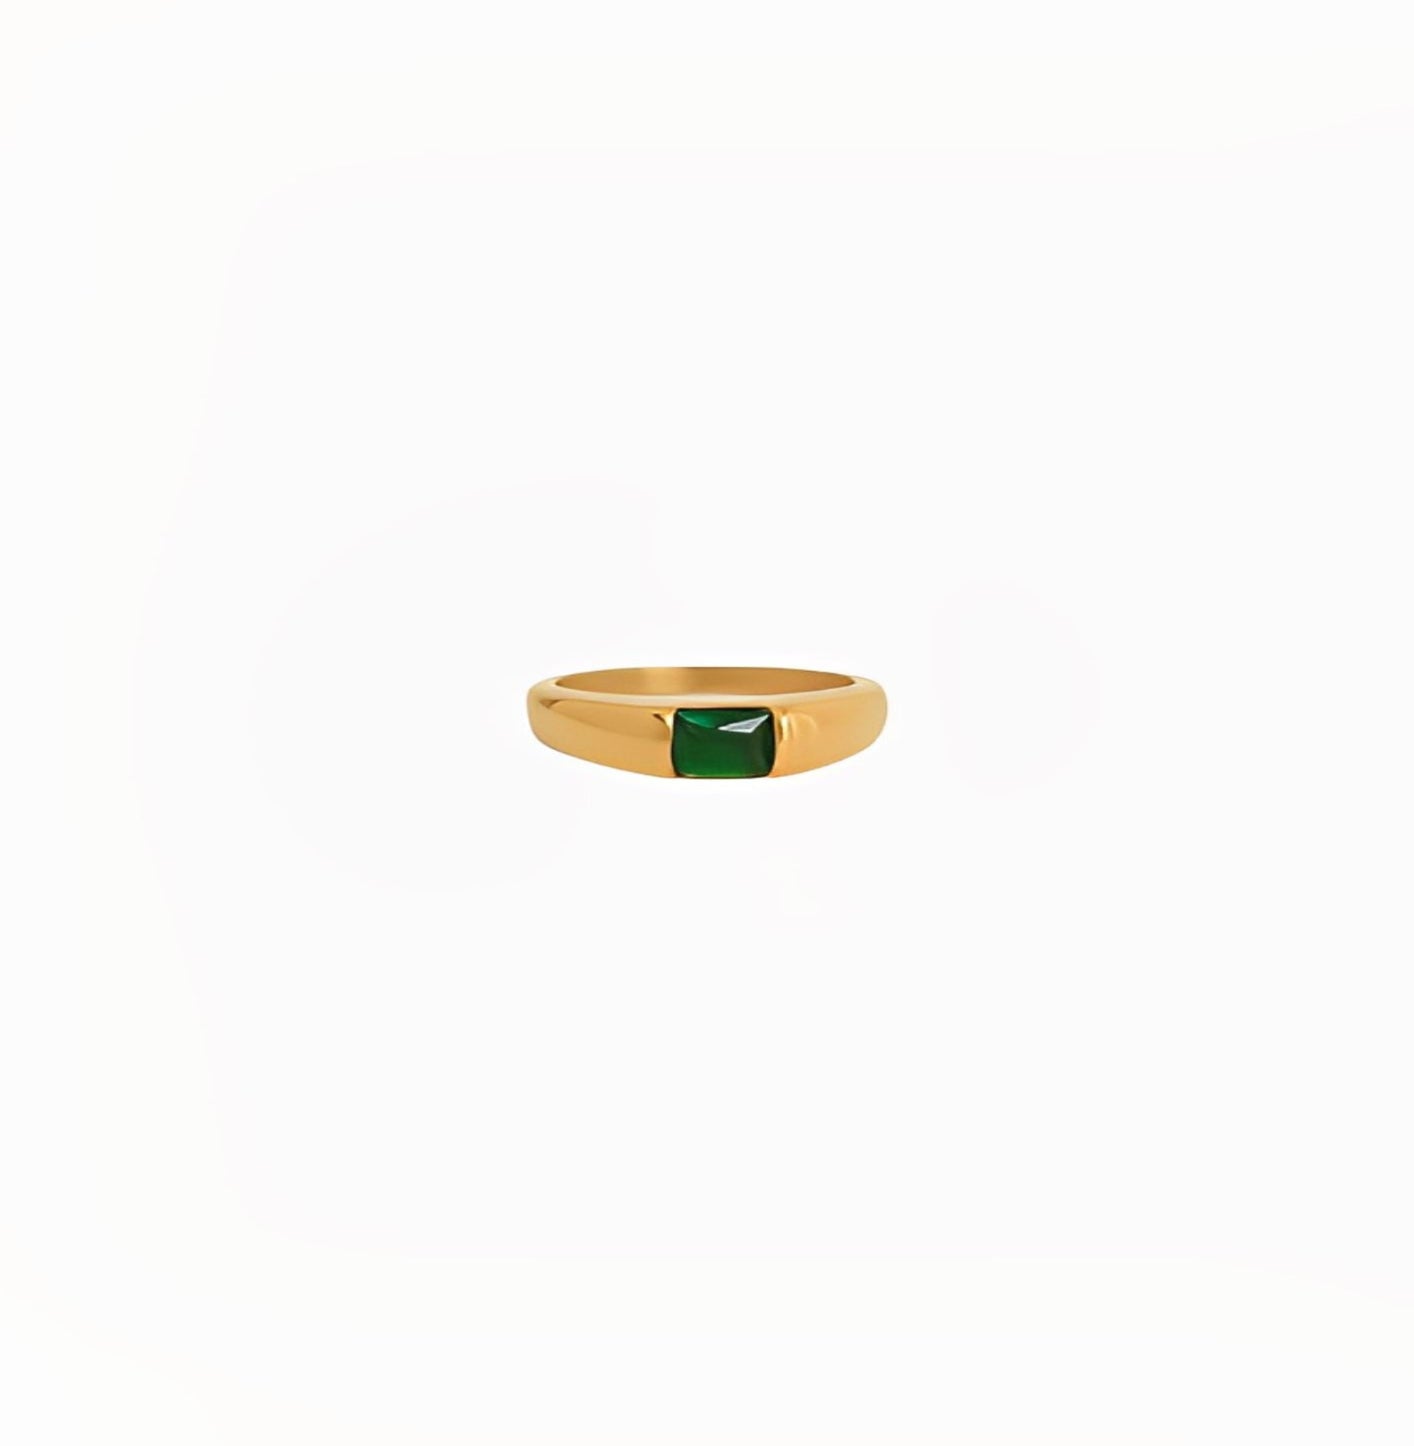 GREEN UP RING ring Yubama Jewelry Online Store - The Elegant Designs of Gold and Silver ! number 6 